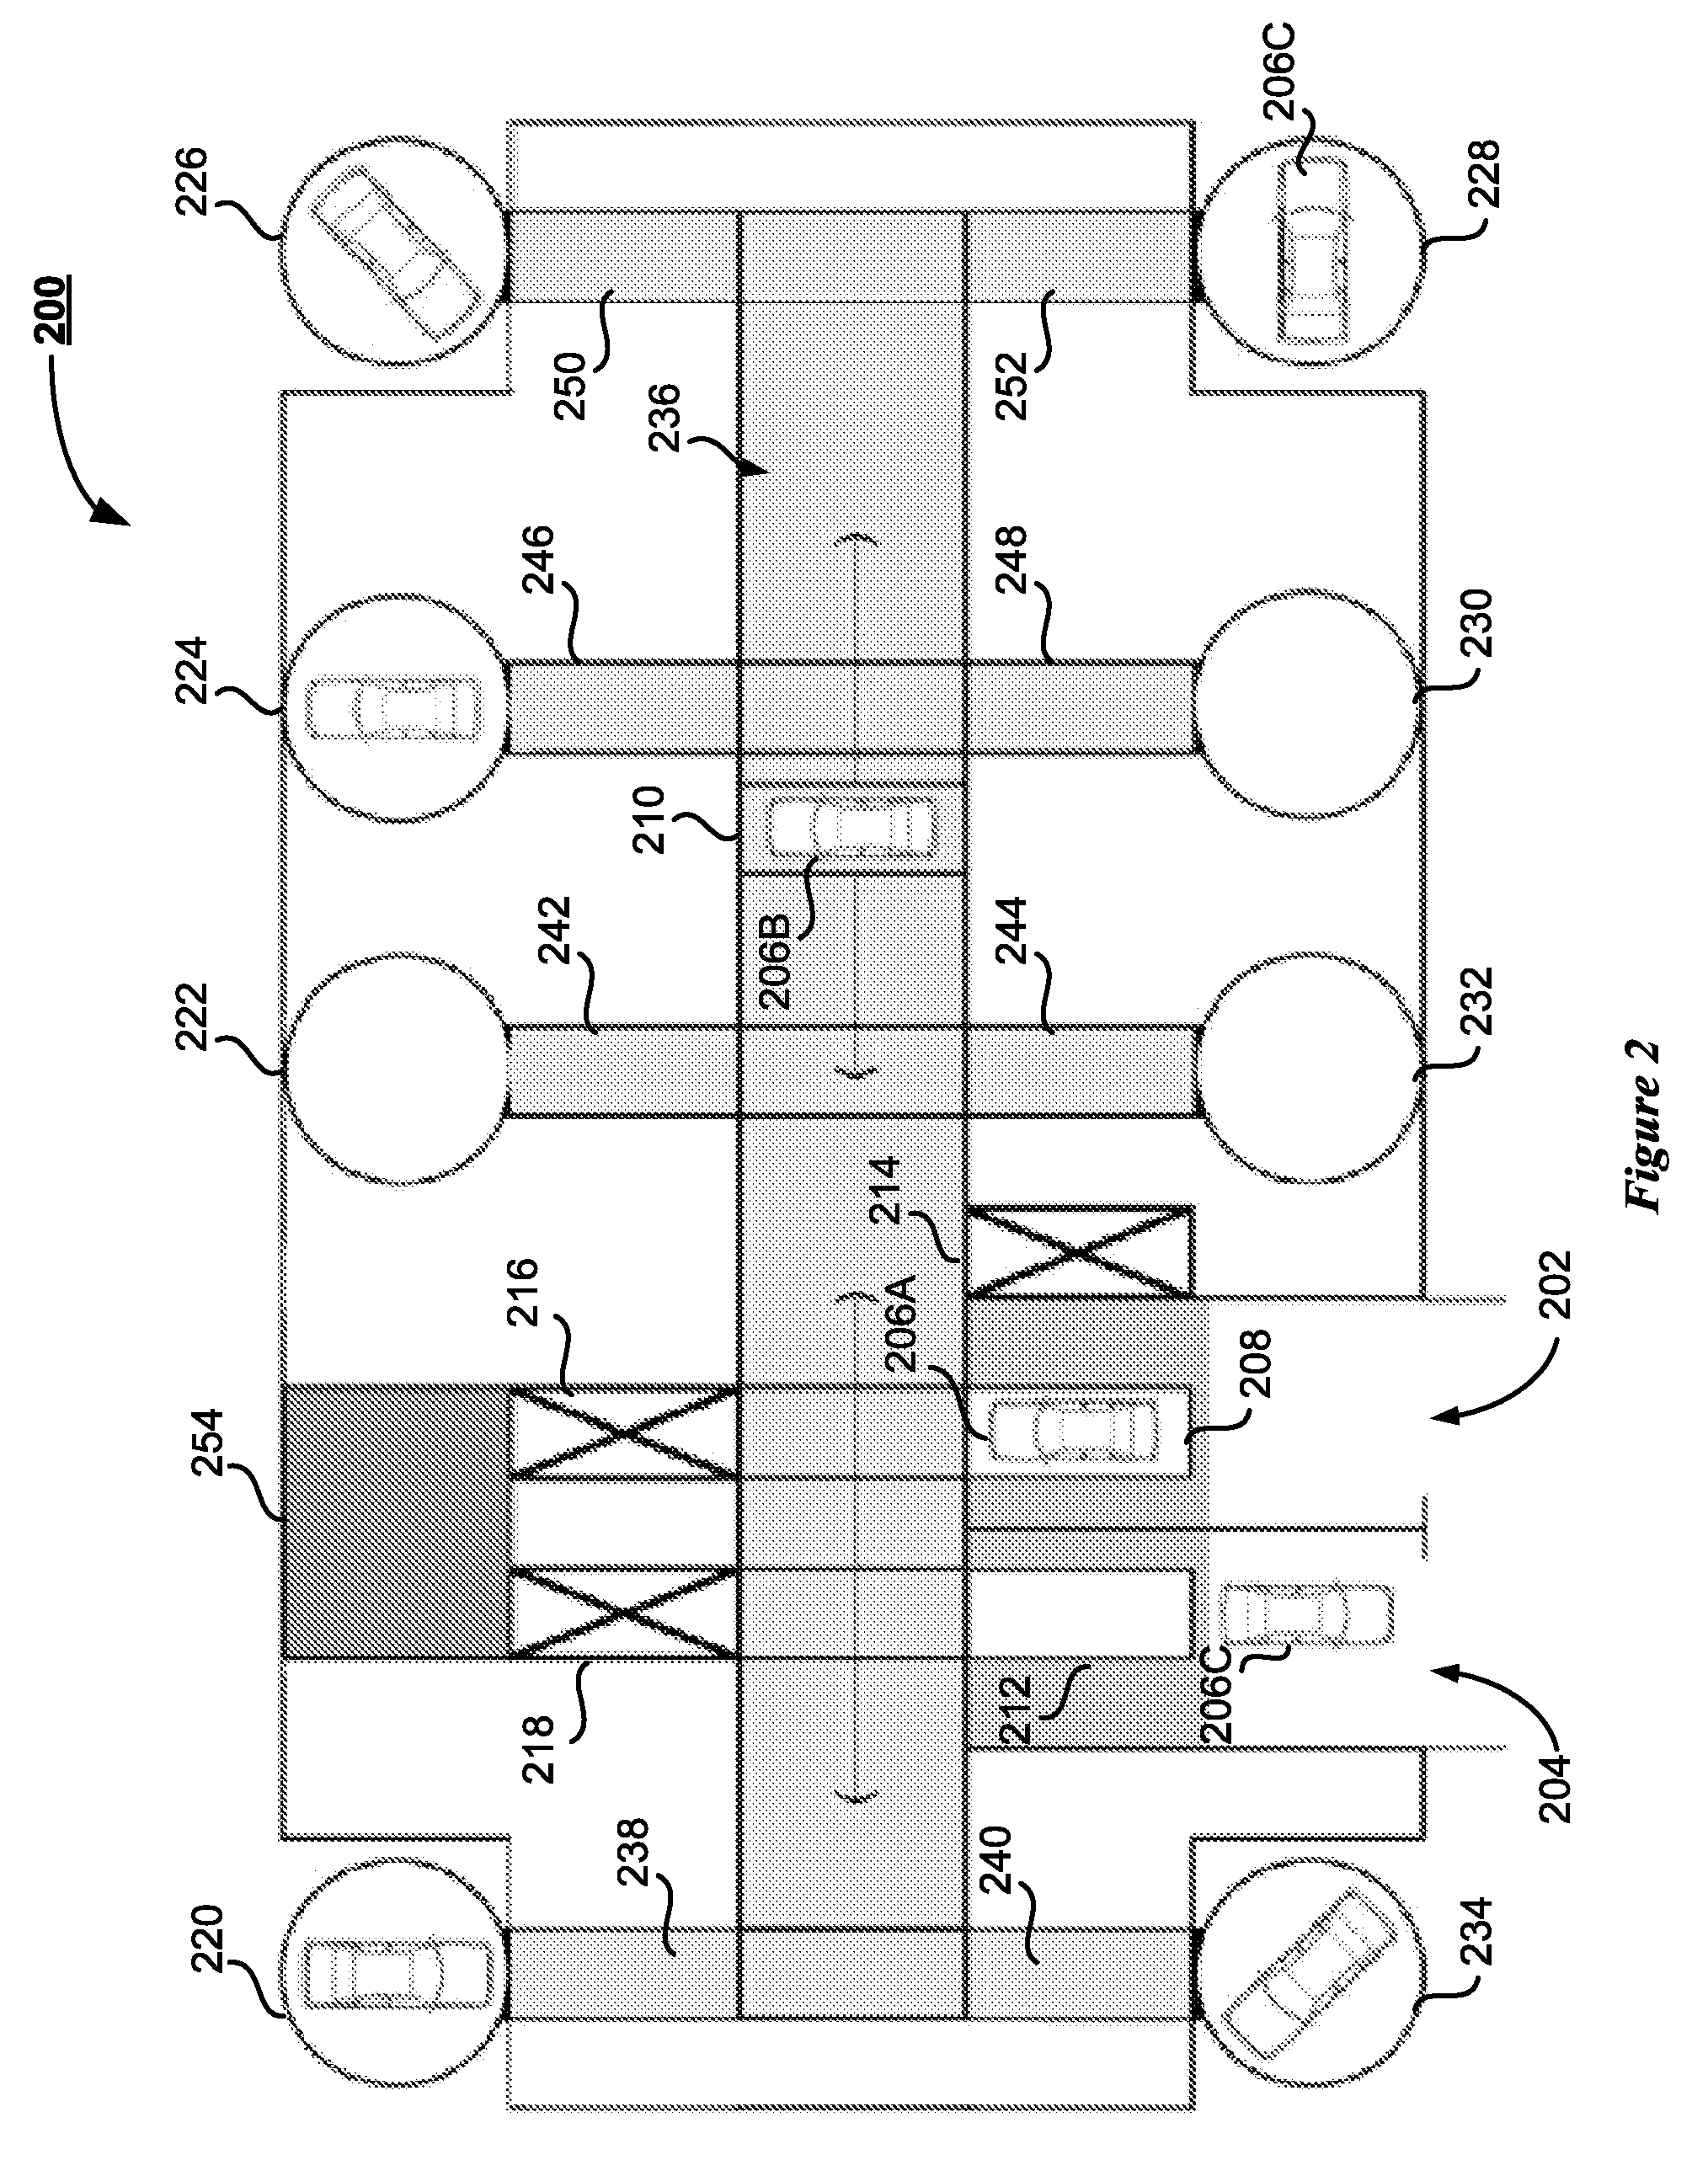 A system and method for automated goods storage and retrieval